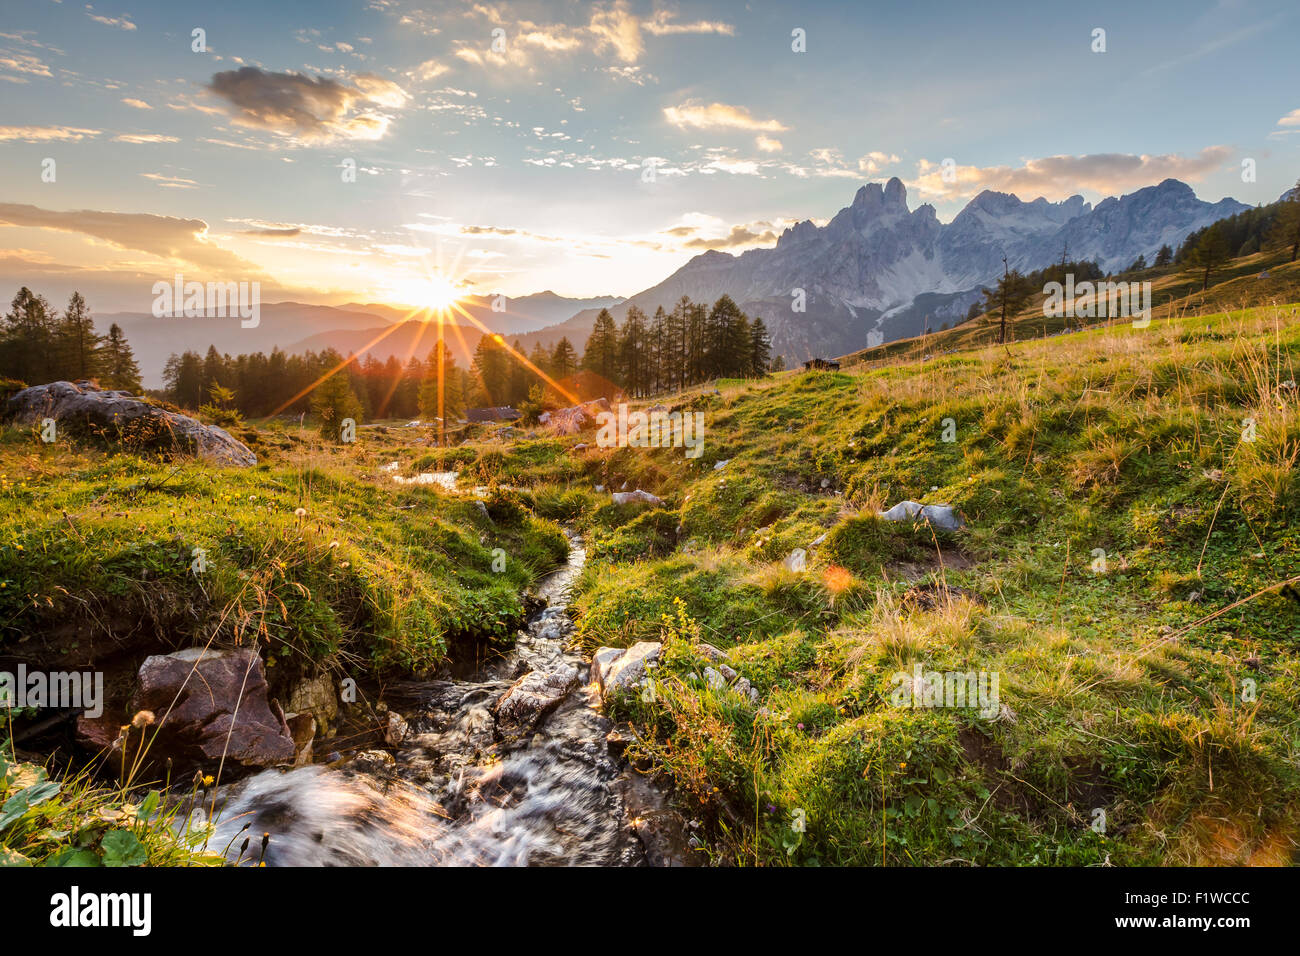 The sun sets behind the mountains and casts the last light over a high pasture with a little mountain stream. Stock Photo